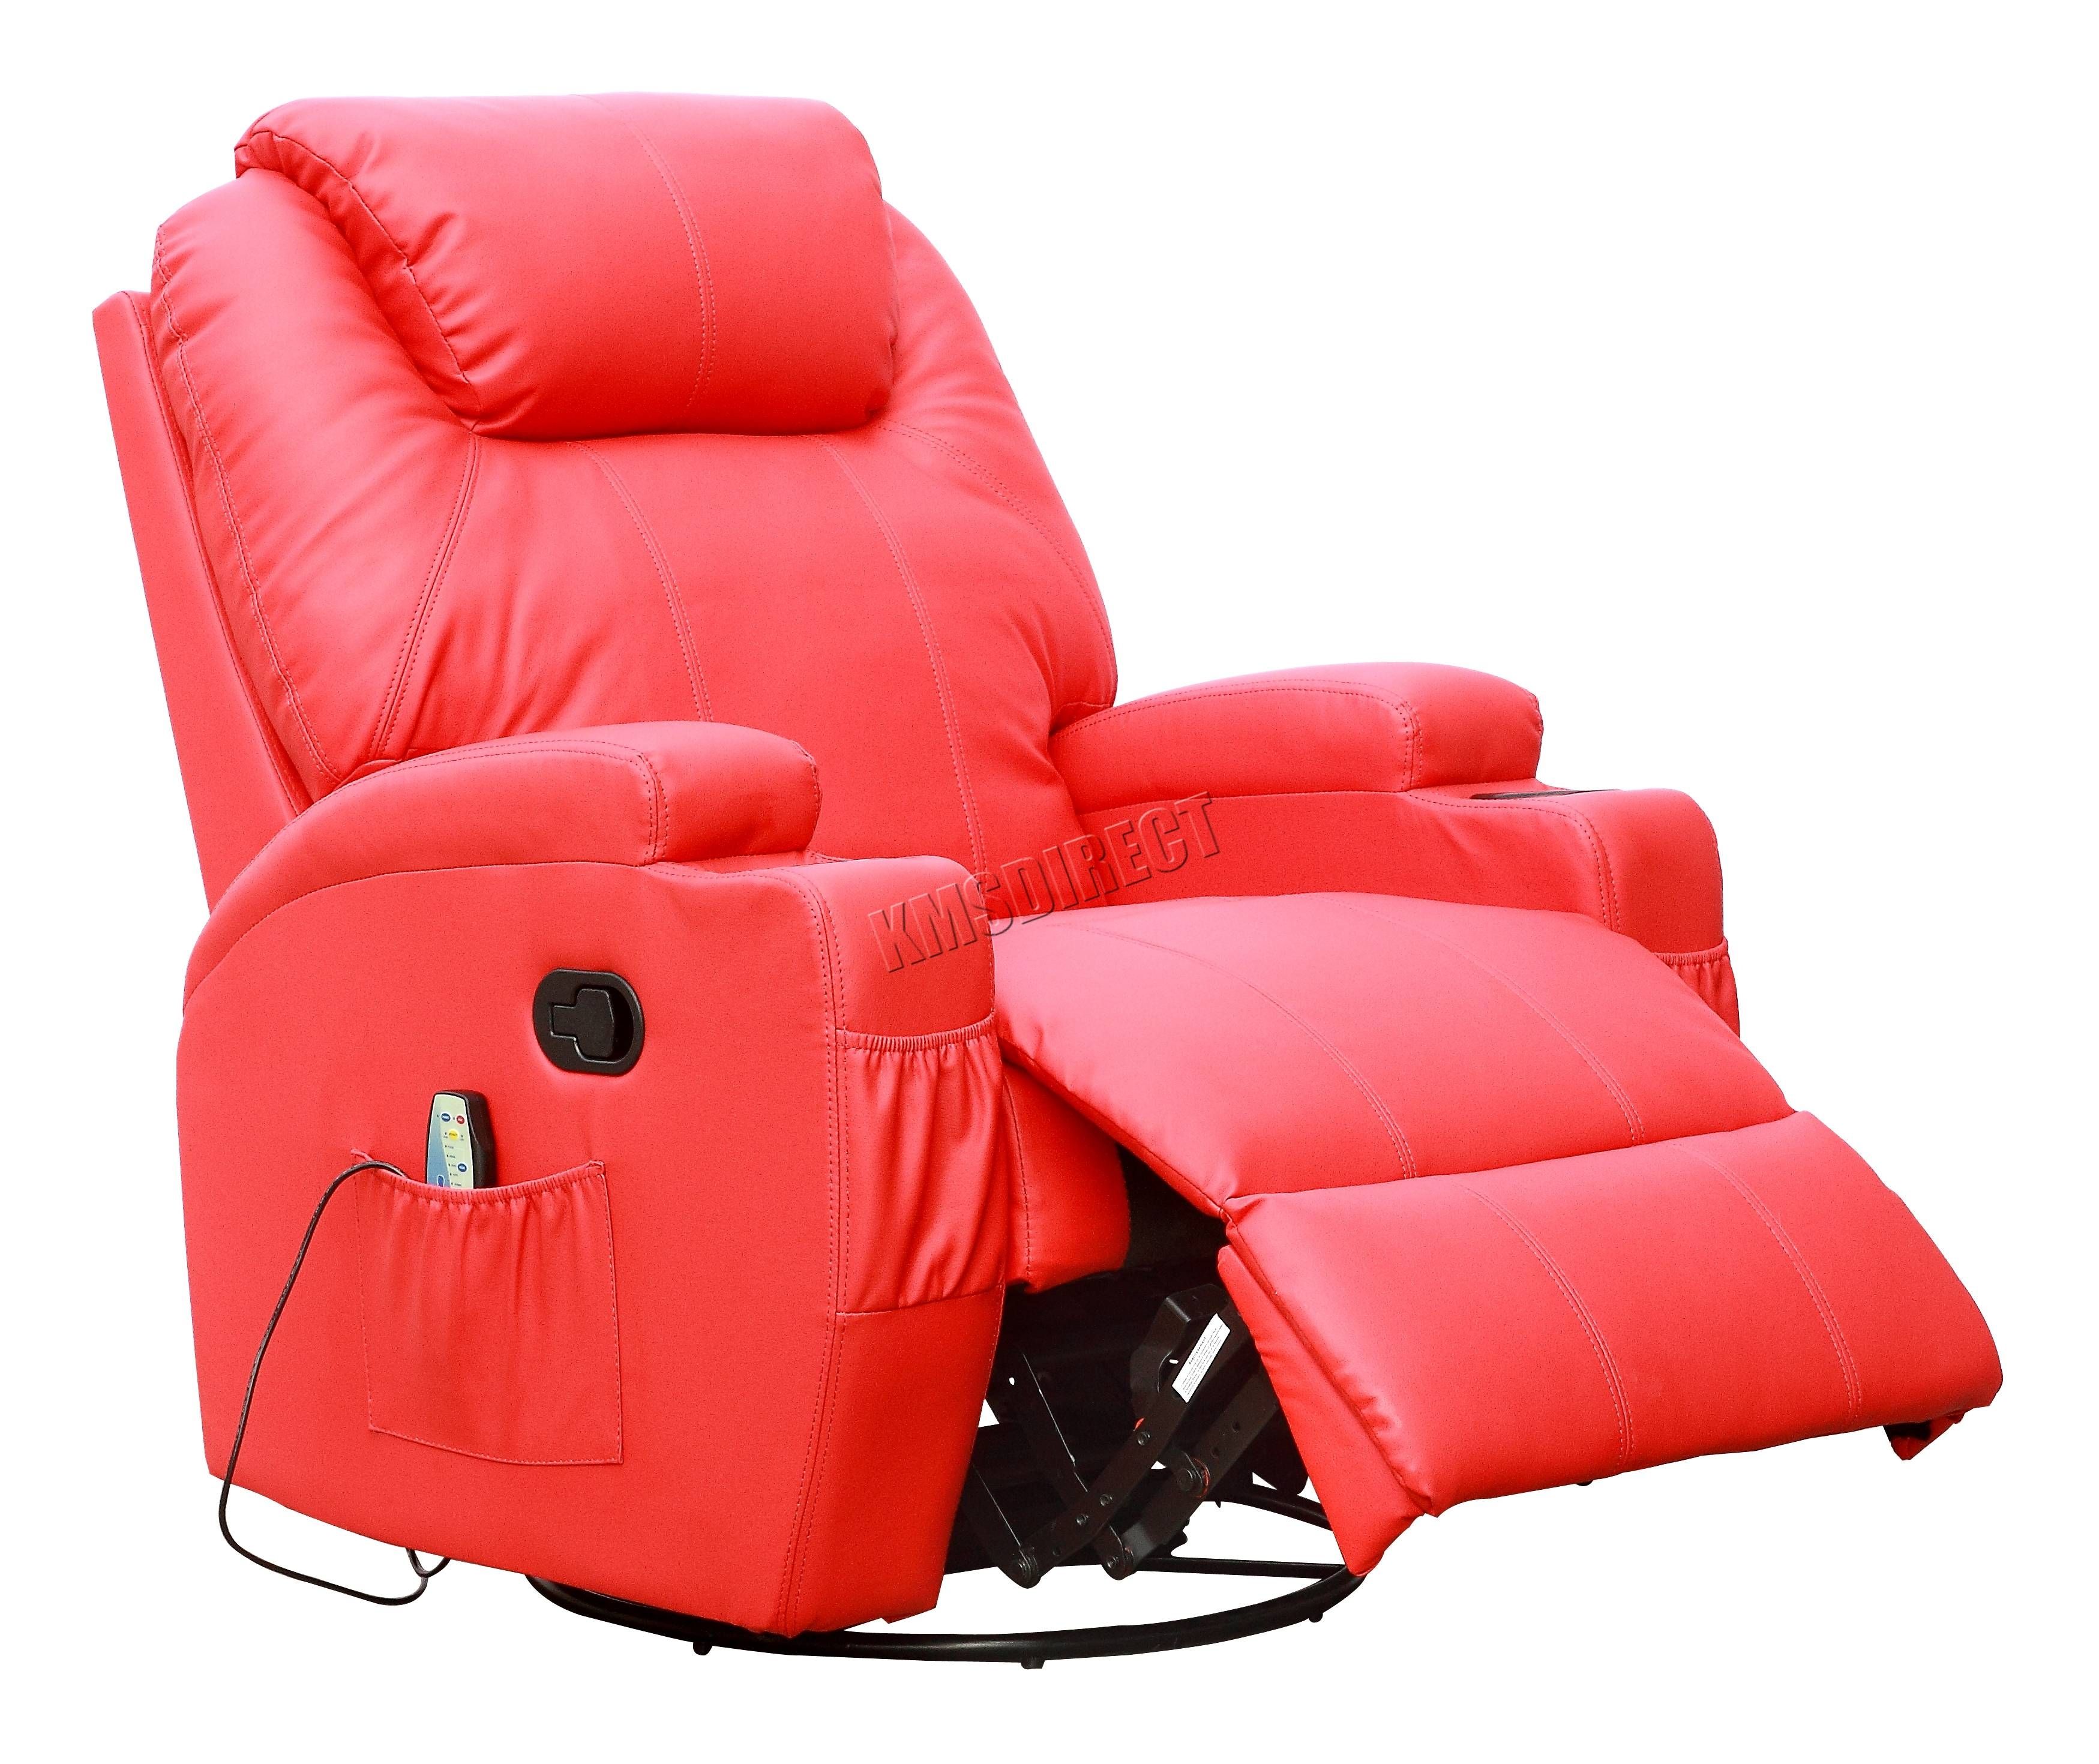 Foxhunter Bonded Leather Massage Recliner Chair Cinema Sofa Regarding Sofa Chair Recliner (View 15 of 30)